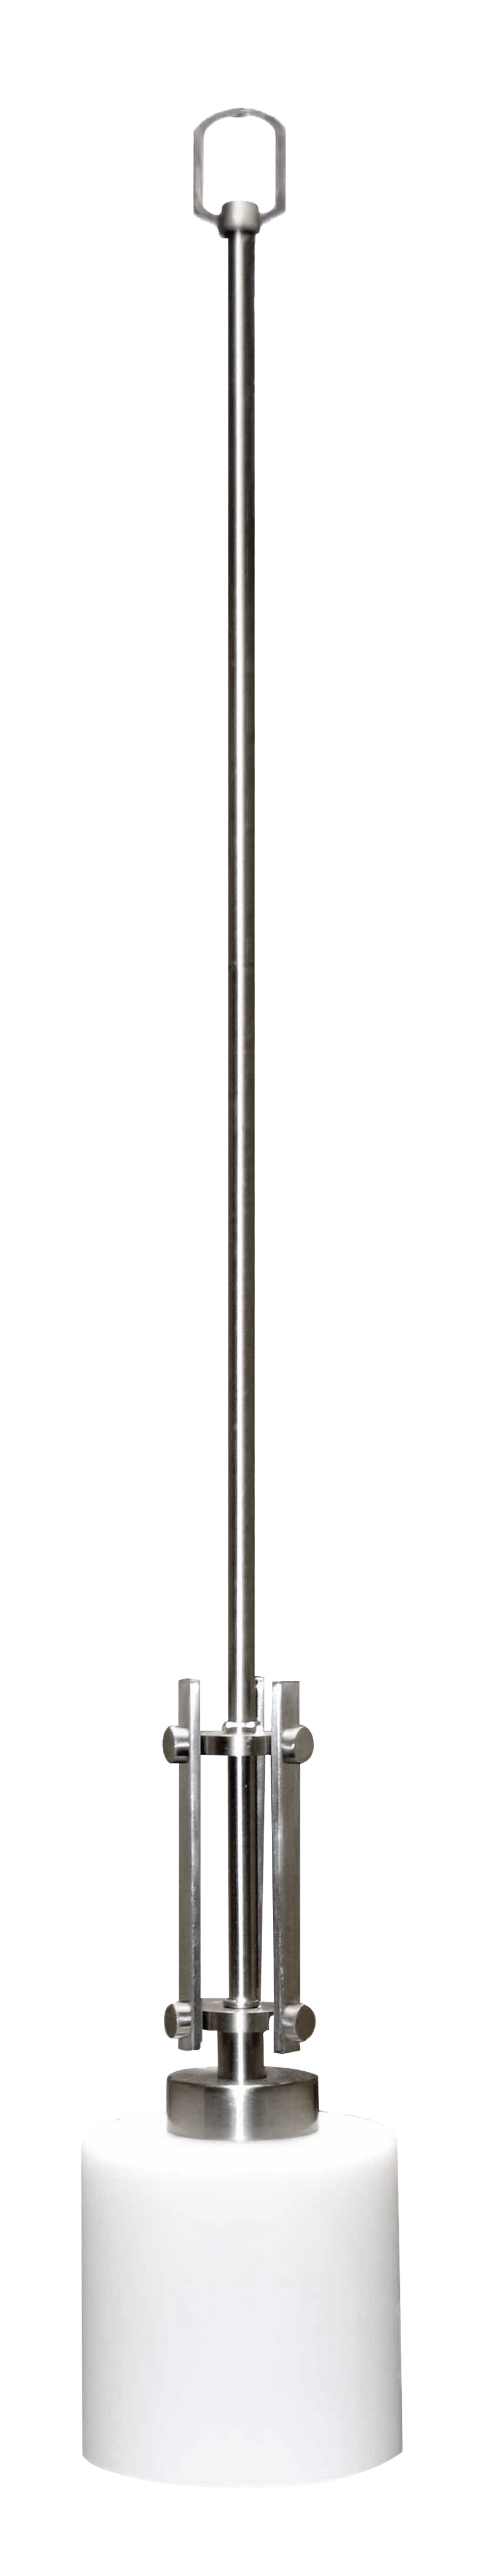 1-Light Brushed Nickel Pendant with White Glass